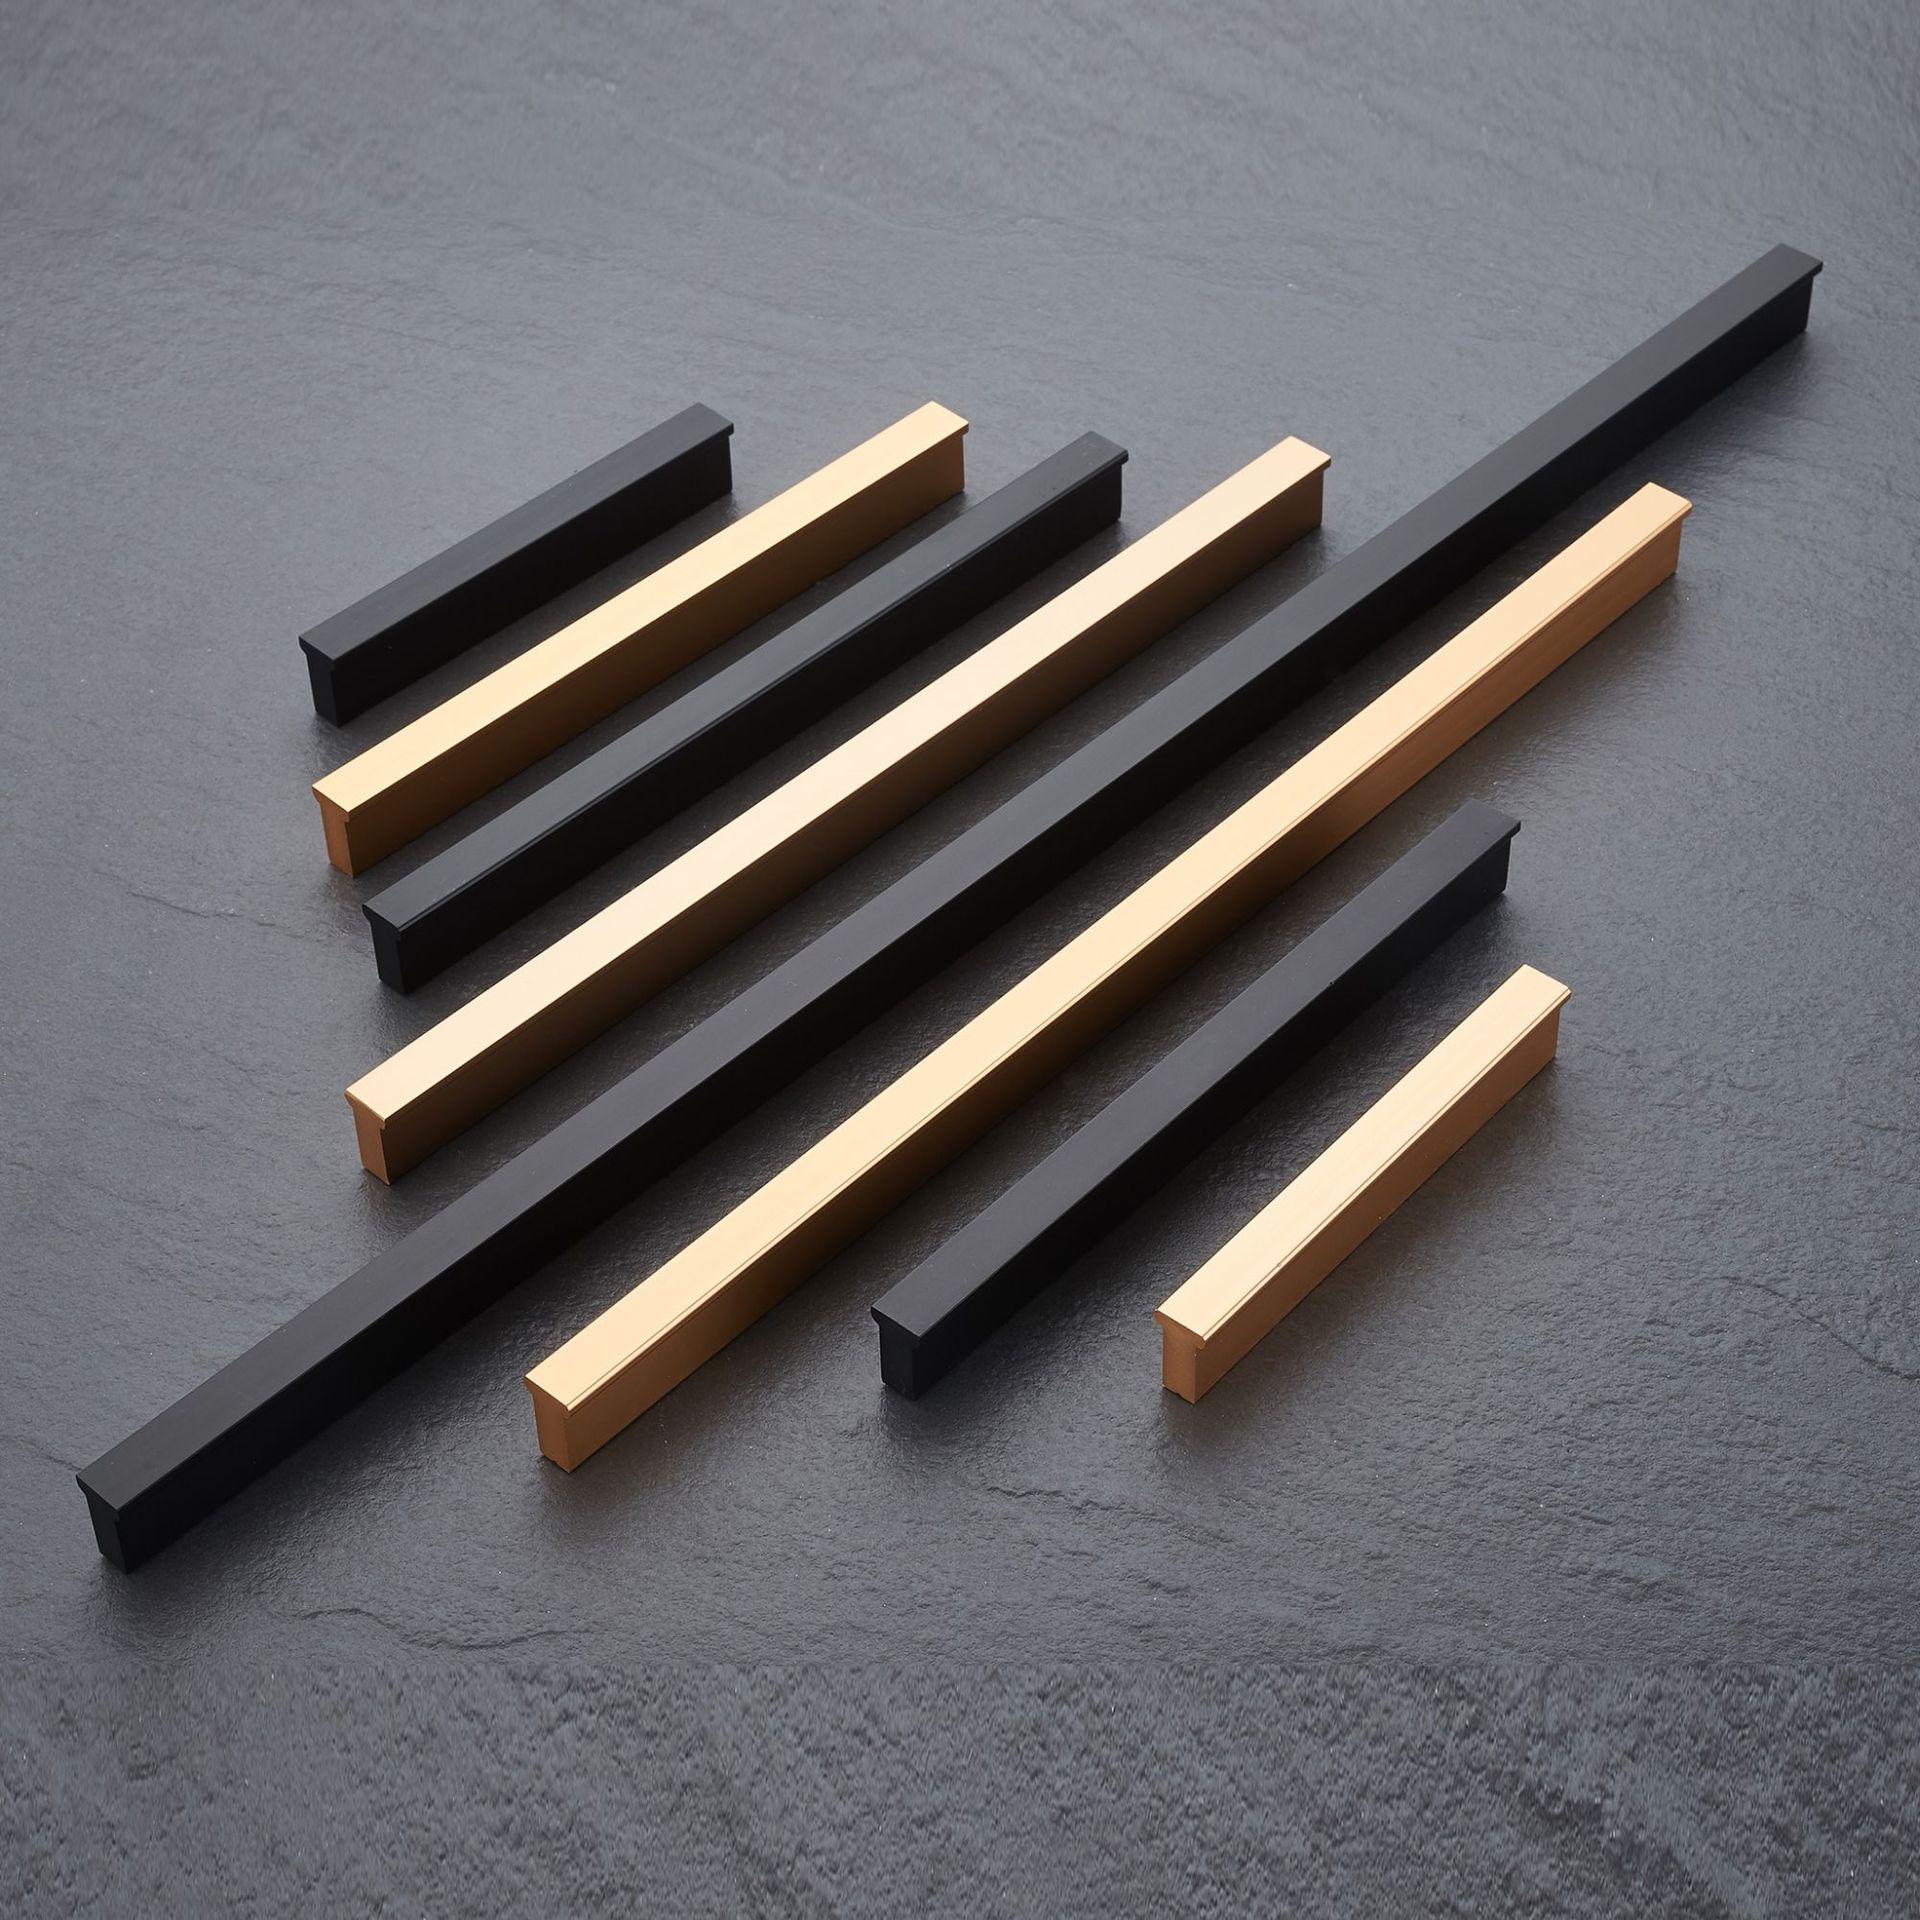 Paidu introduces exquisite furniture handles to add an artistic touch to home decoration.